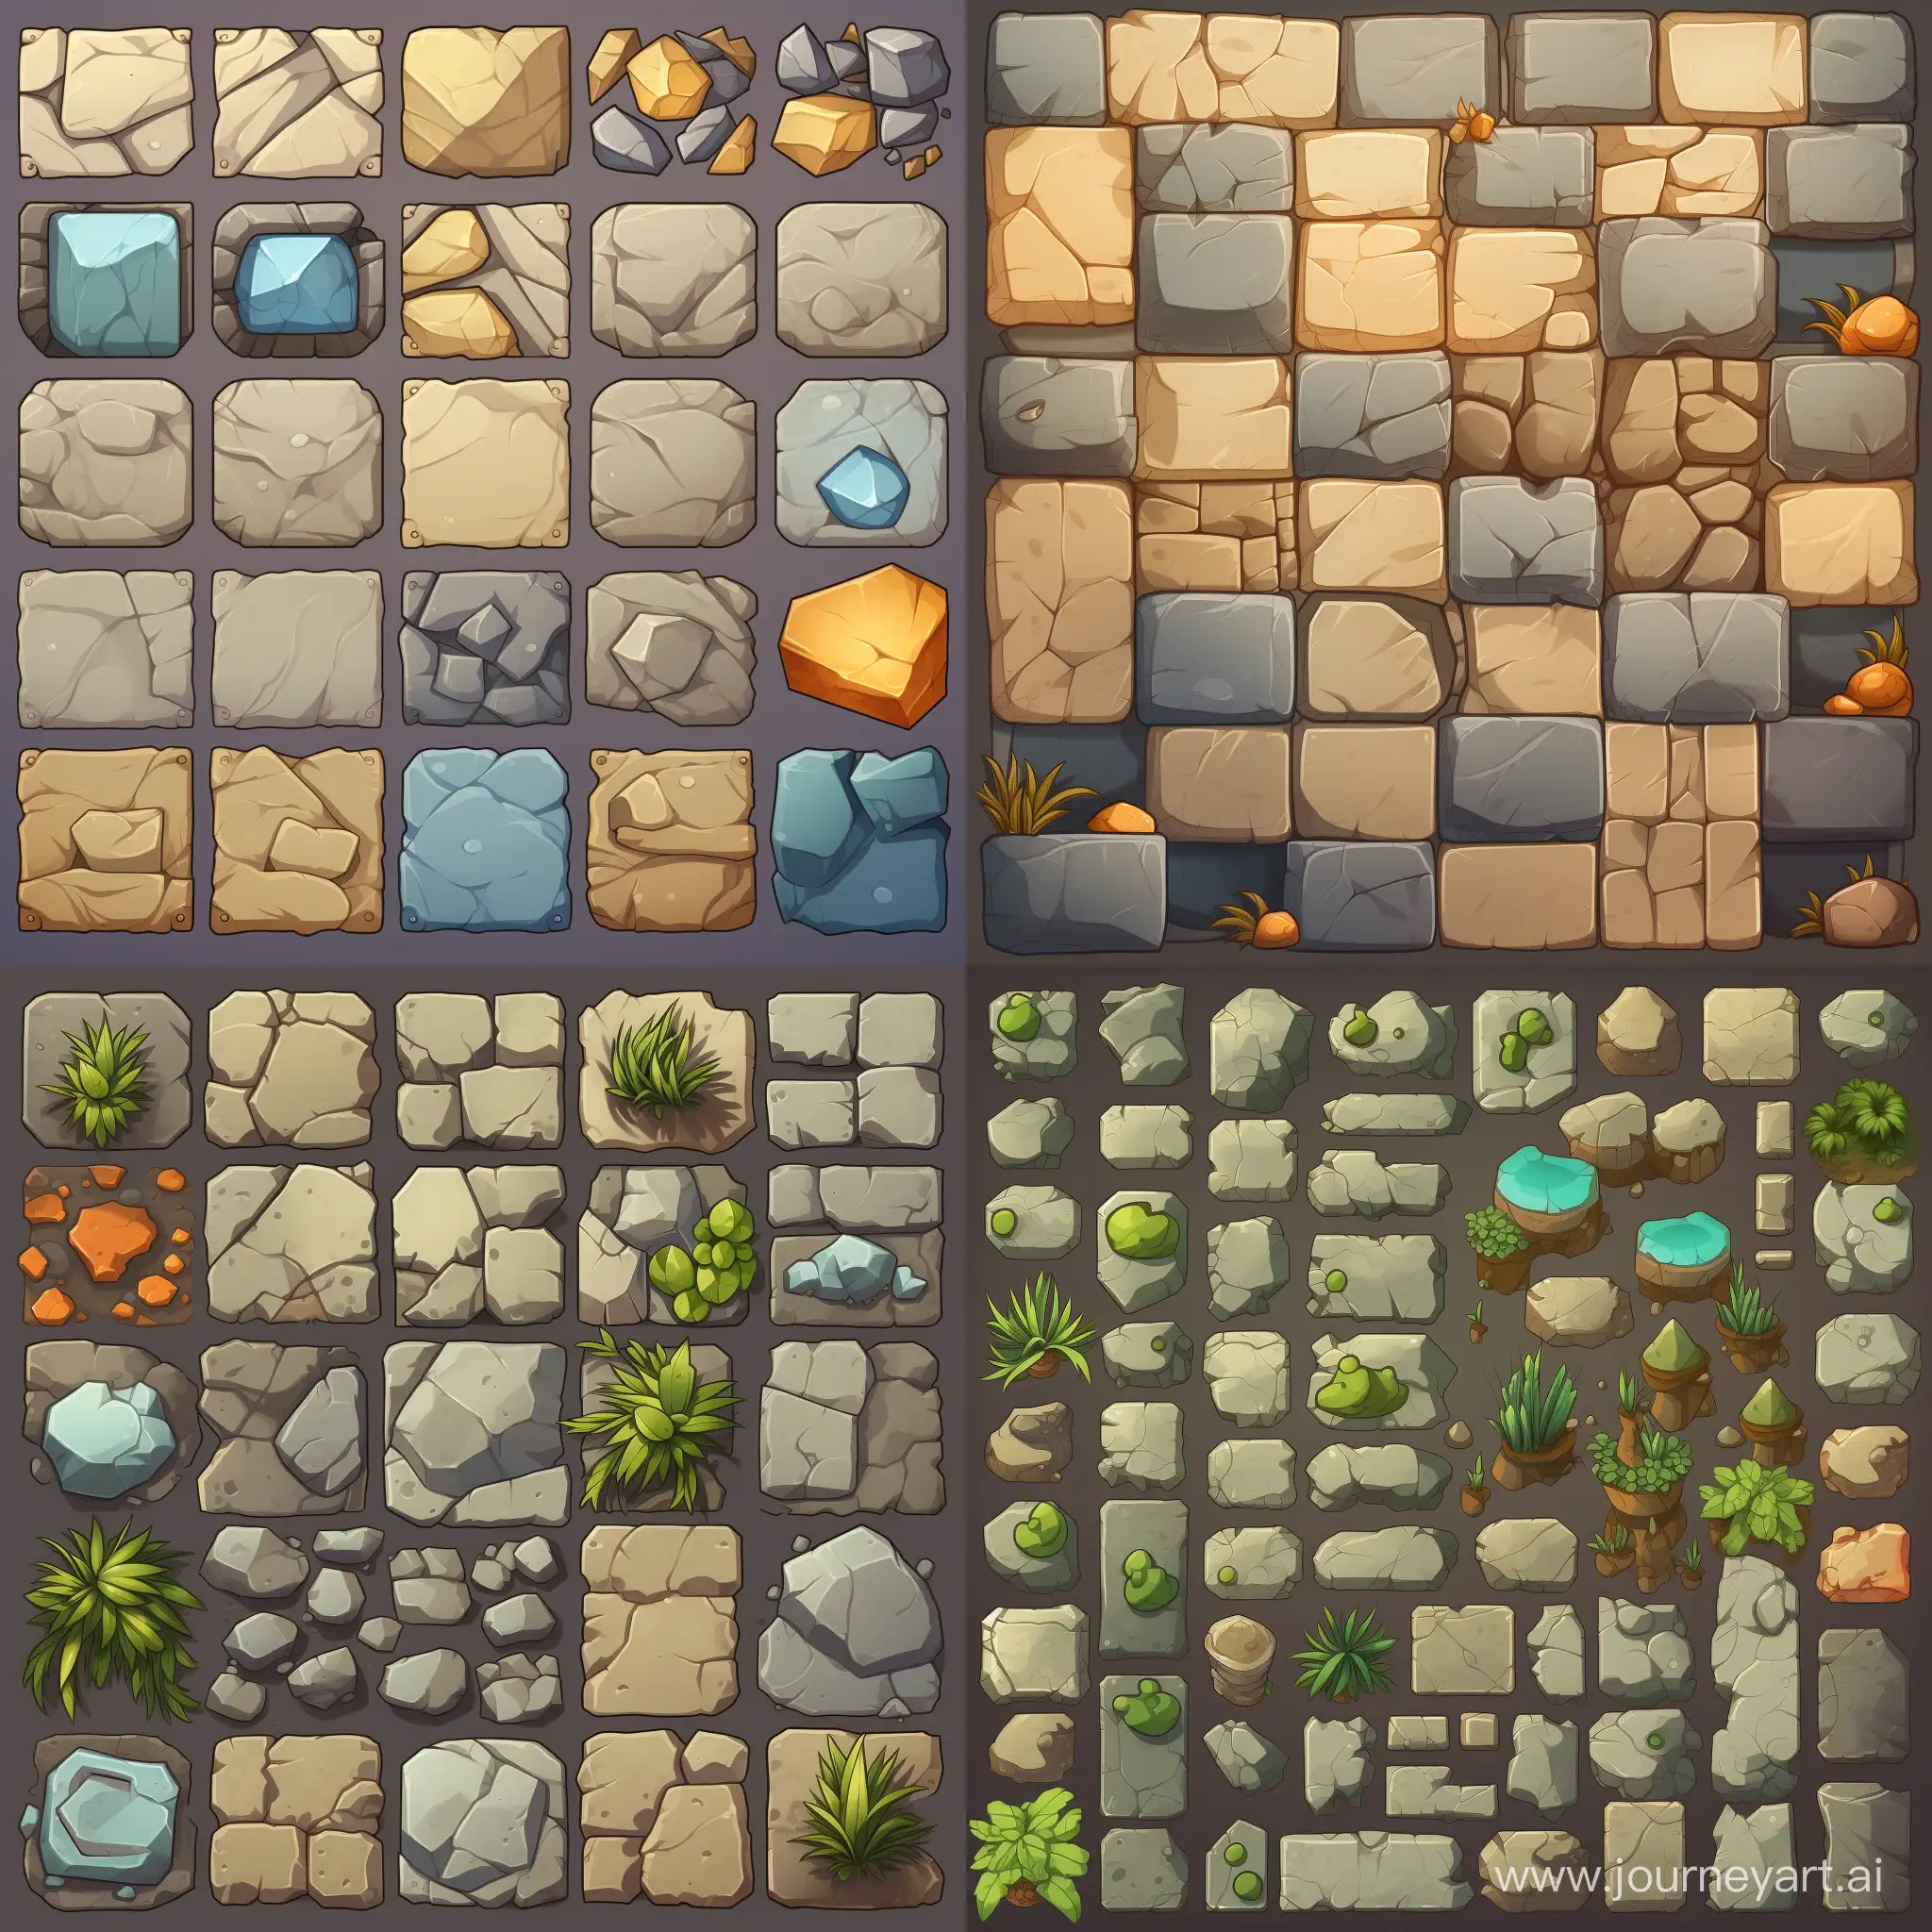 Cartoon-Stone-Tile-Set-for-TopDown-Game-Background-1080-x-1080